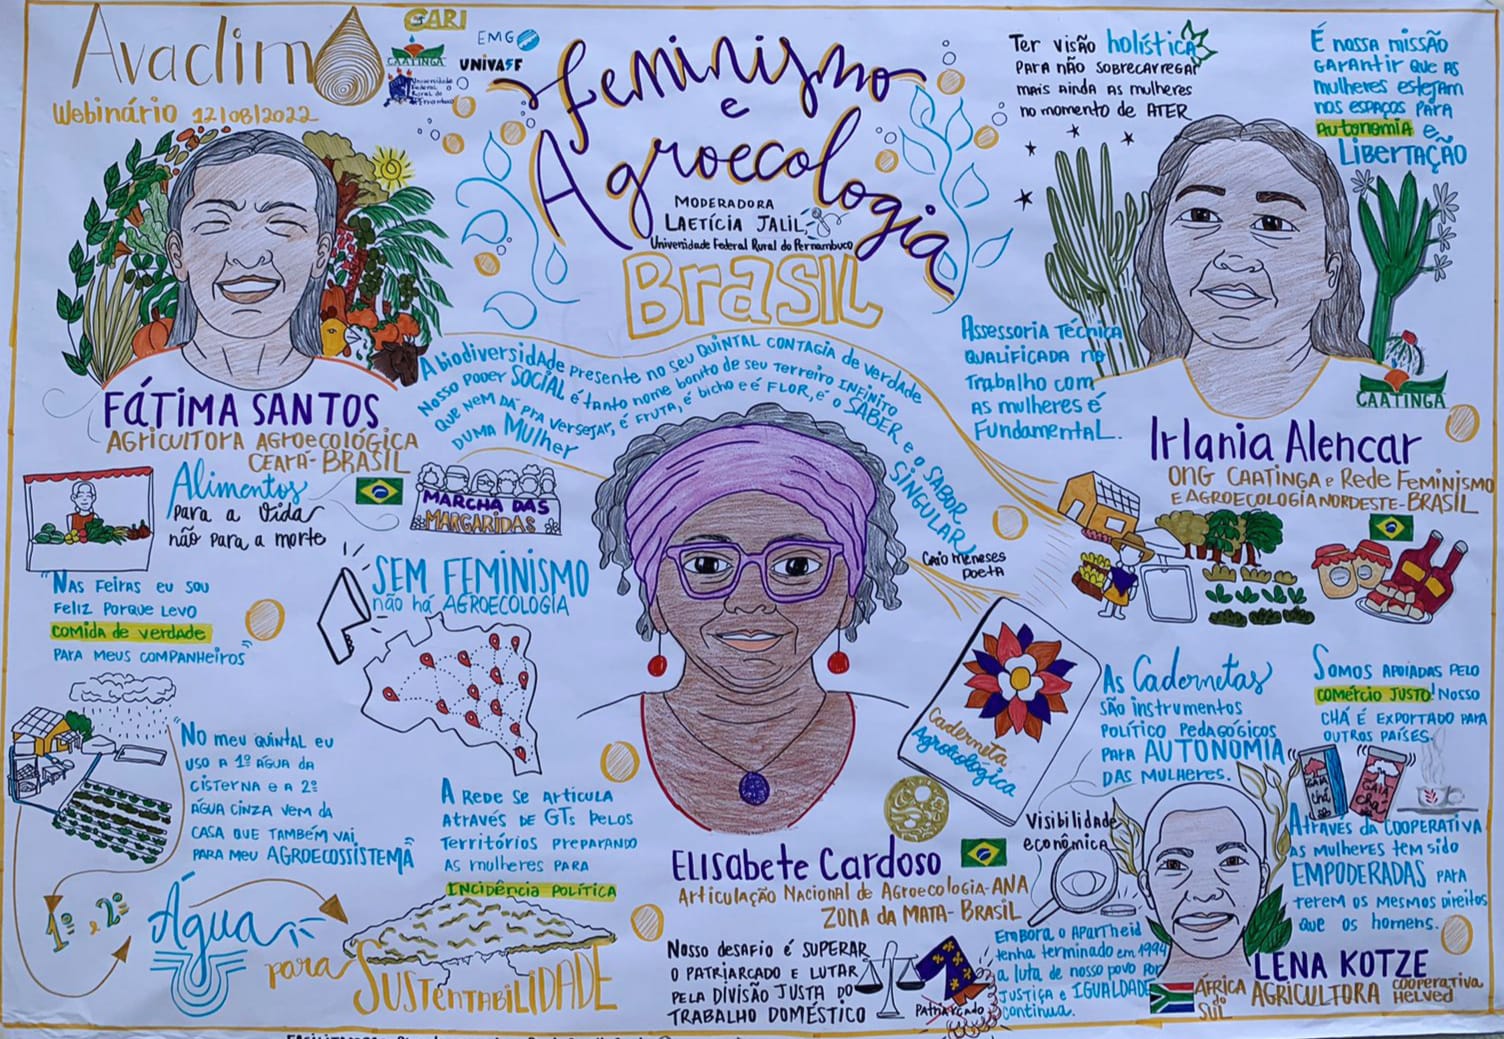 How Agroecological Logbooks empower women farmers in Brazil